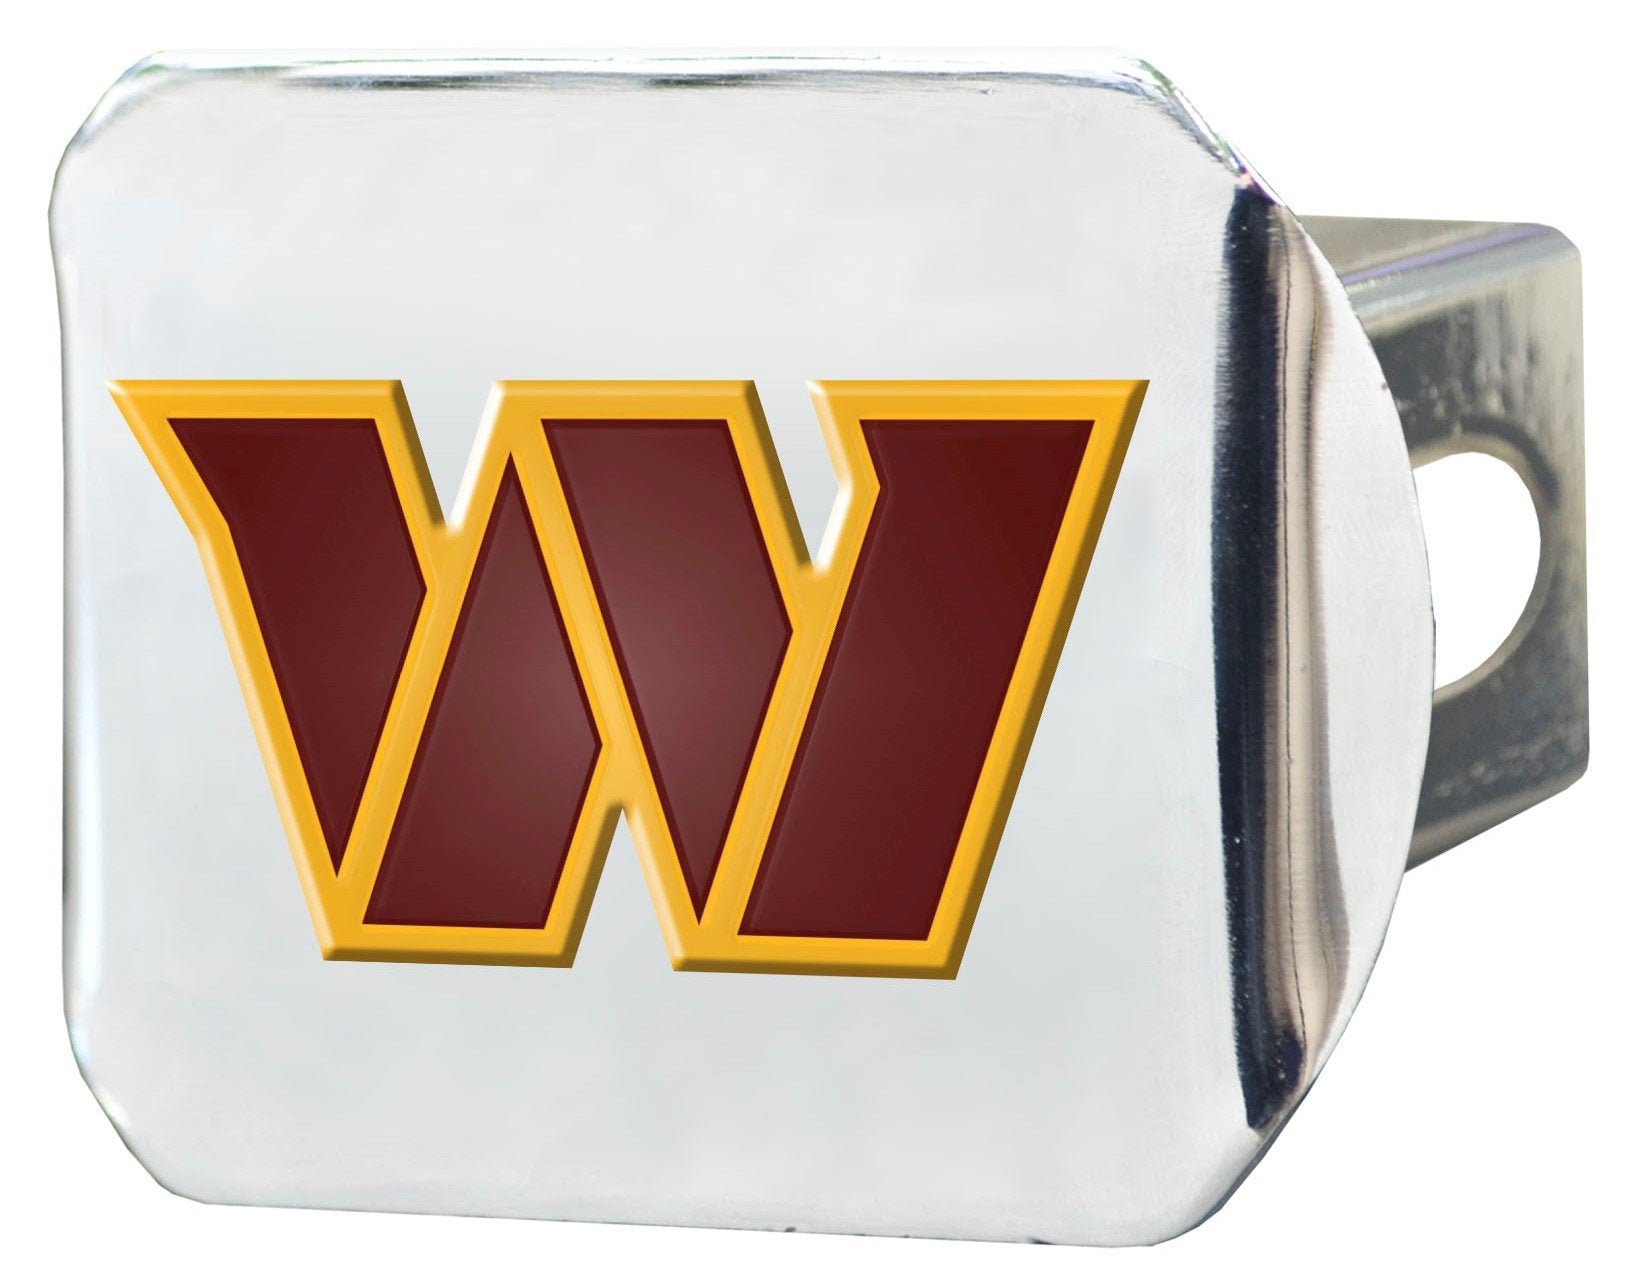 Washington Commanders Solid Metal Hitch Cover with Color Metal Emblem 2 Inch Square Type III